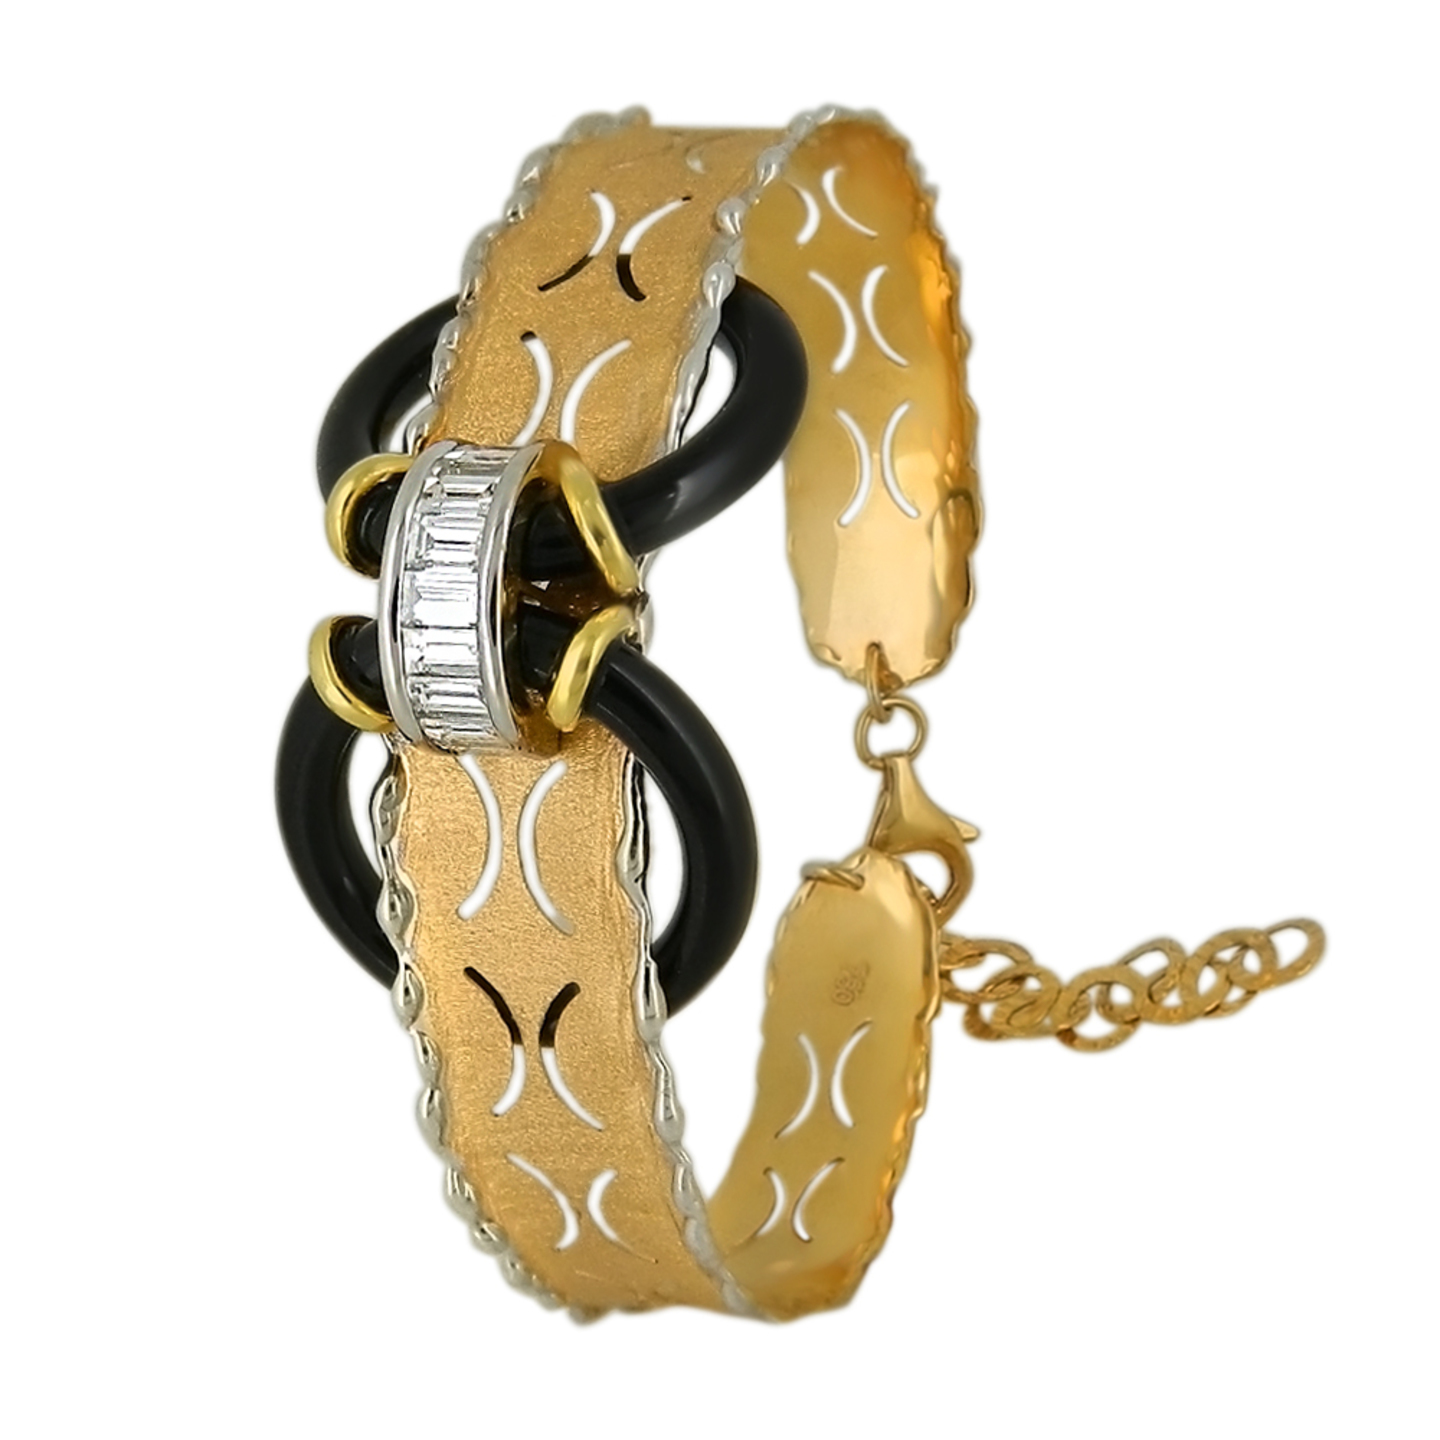 A stylish textured matte Italian gold bracelet with unusual placement of gemstones